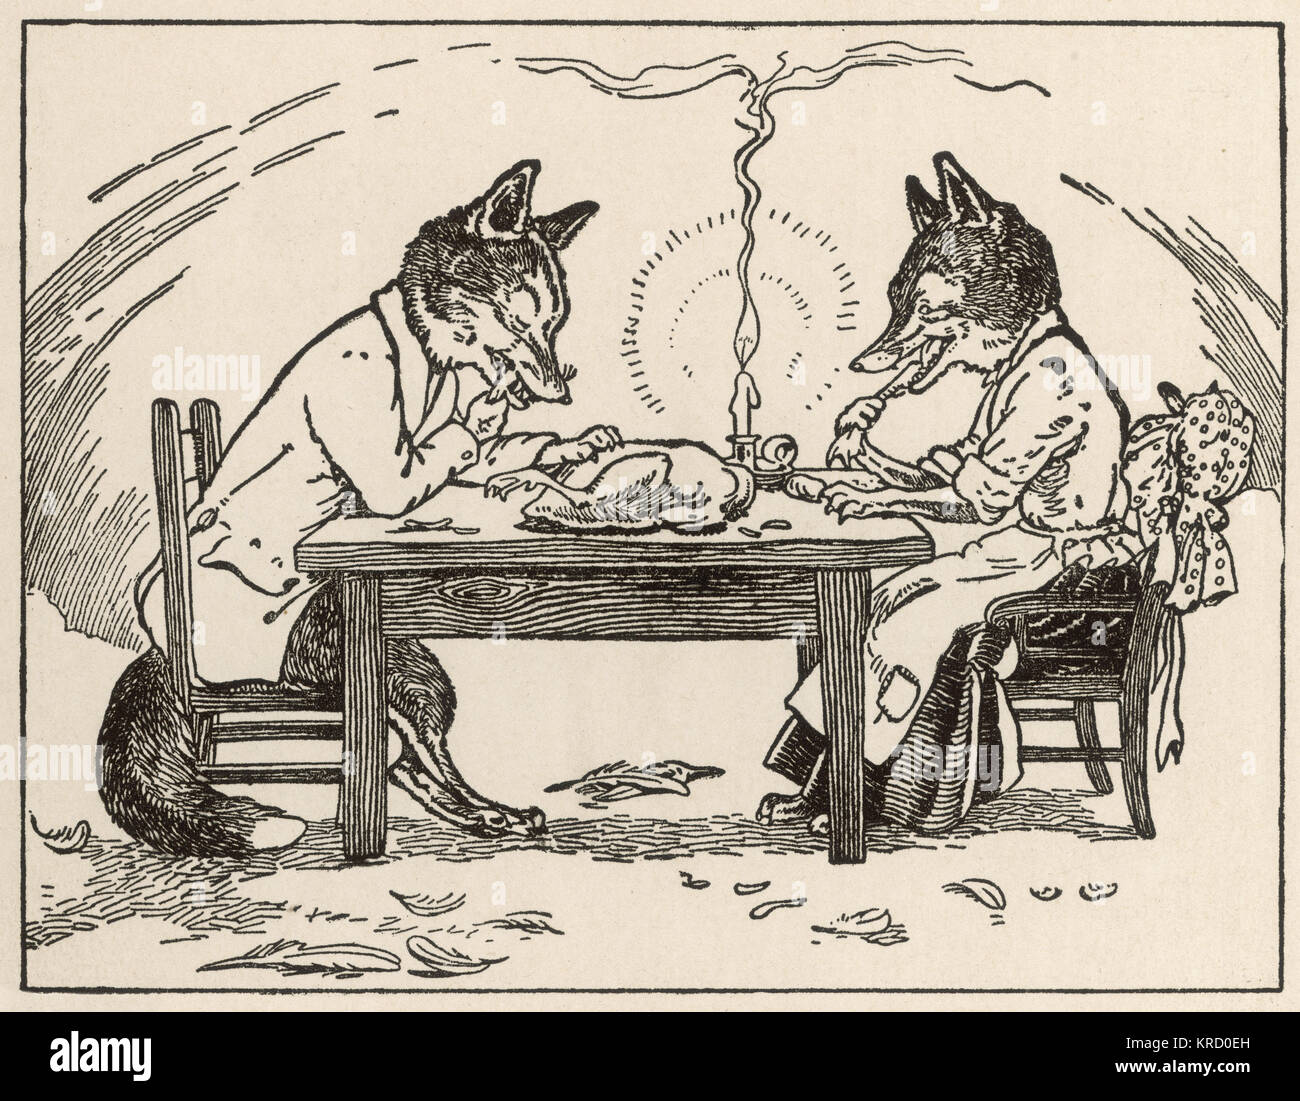 Sitting with his wife, the hungry fox eats the goose without a knife and fork by candlelight, leaving plucked feathers on the floor     Date: circa 1920 Stock Photo